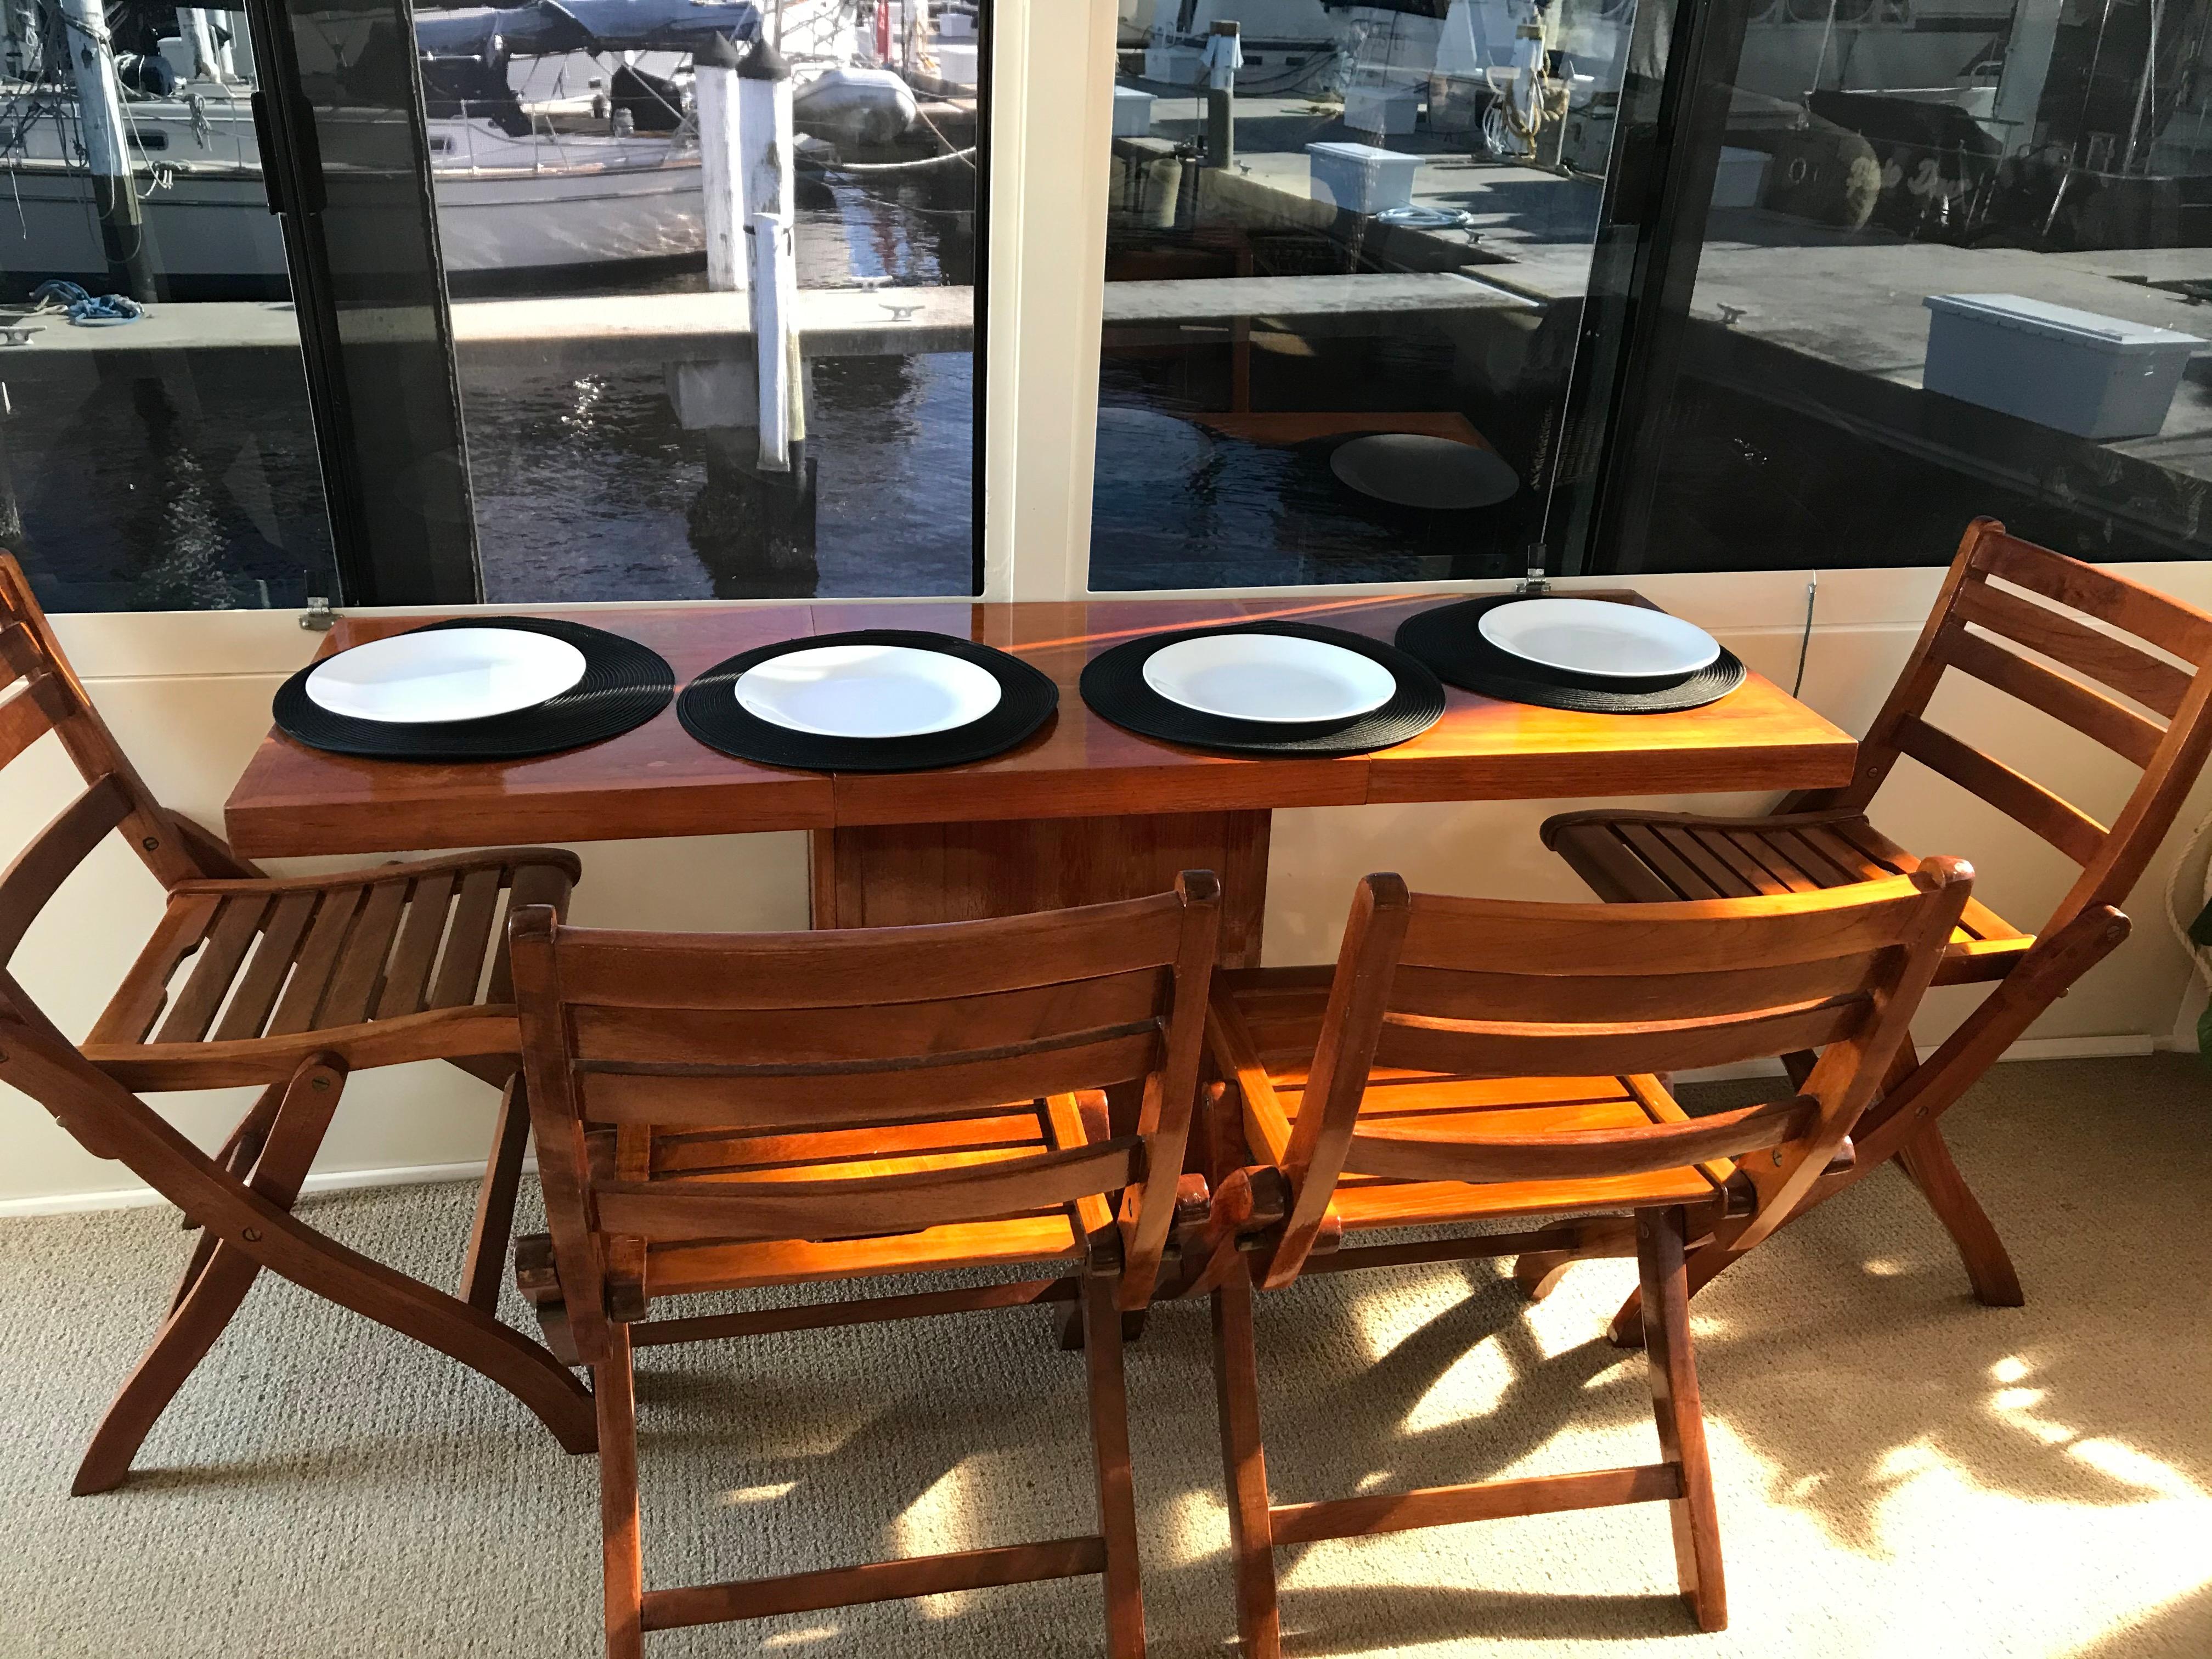 Aft Deck Table Seating for four